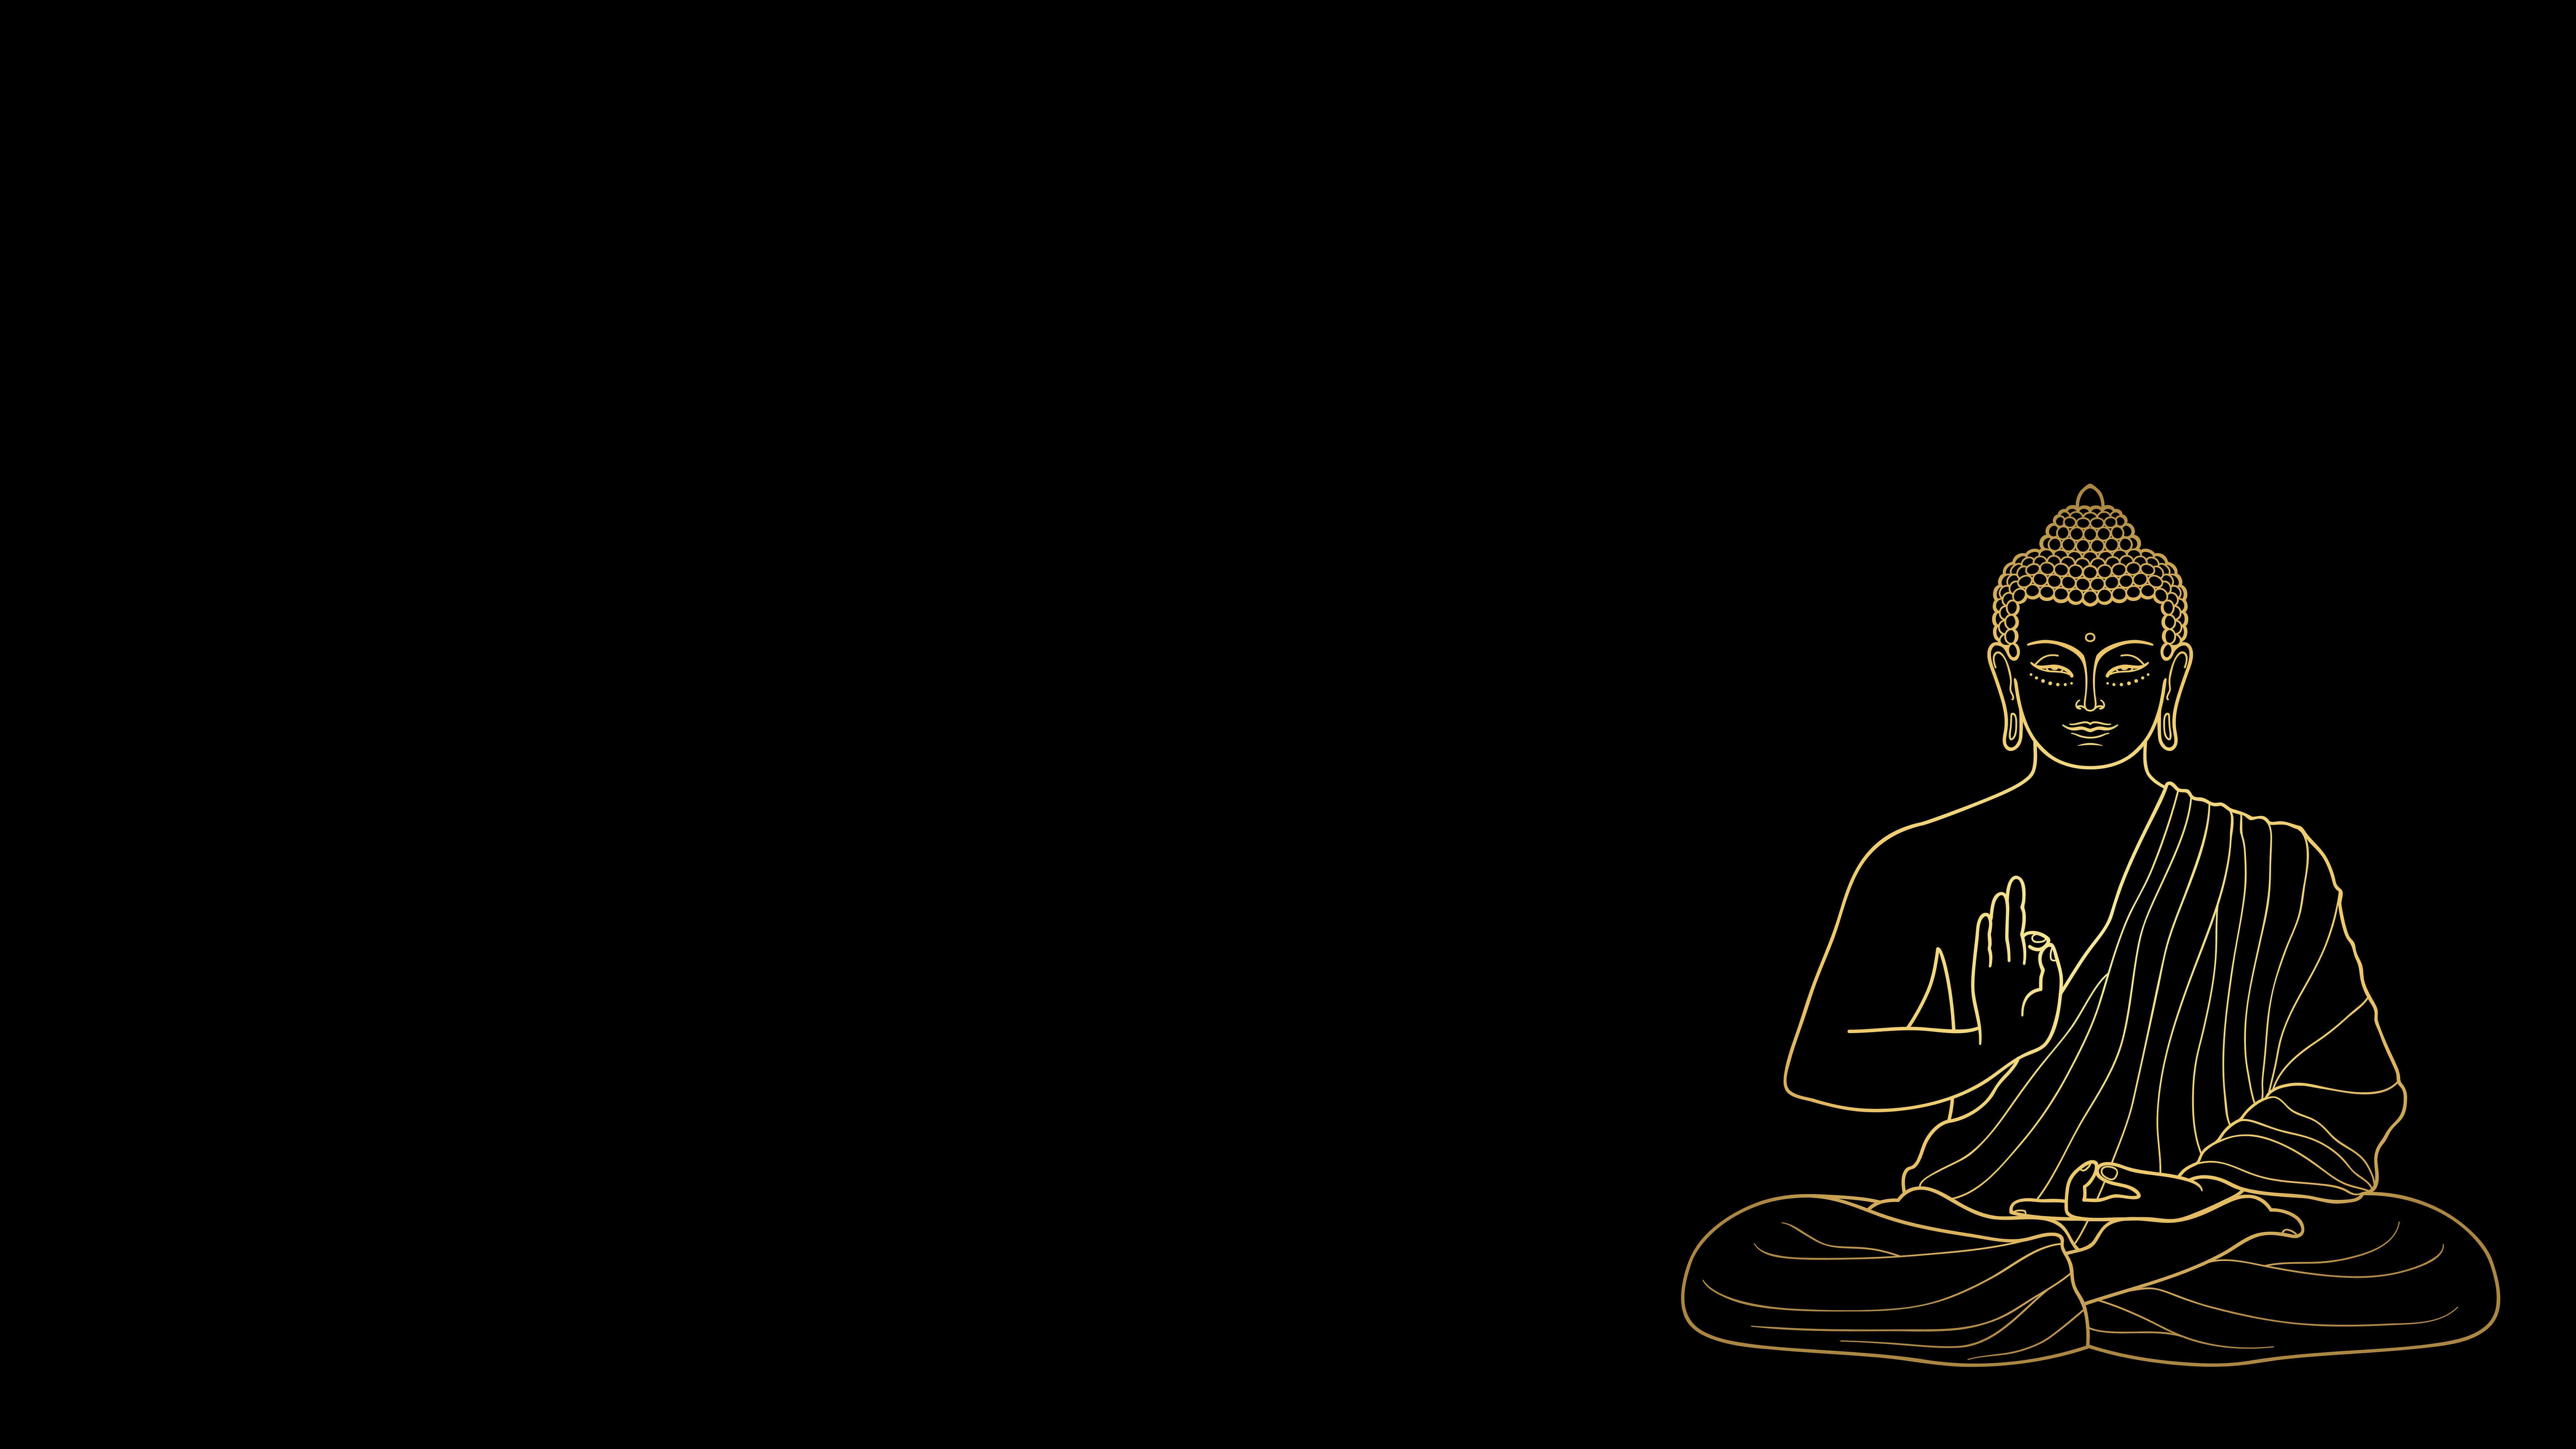 Buddha Desktop With Candle In Lotus